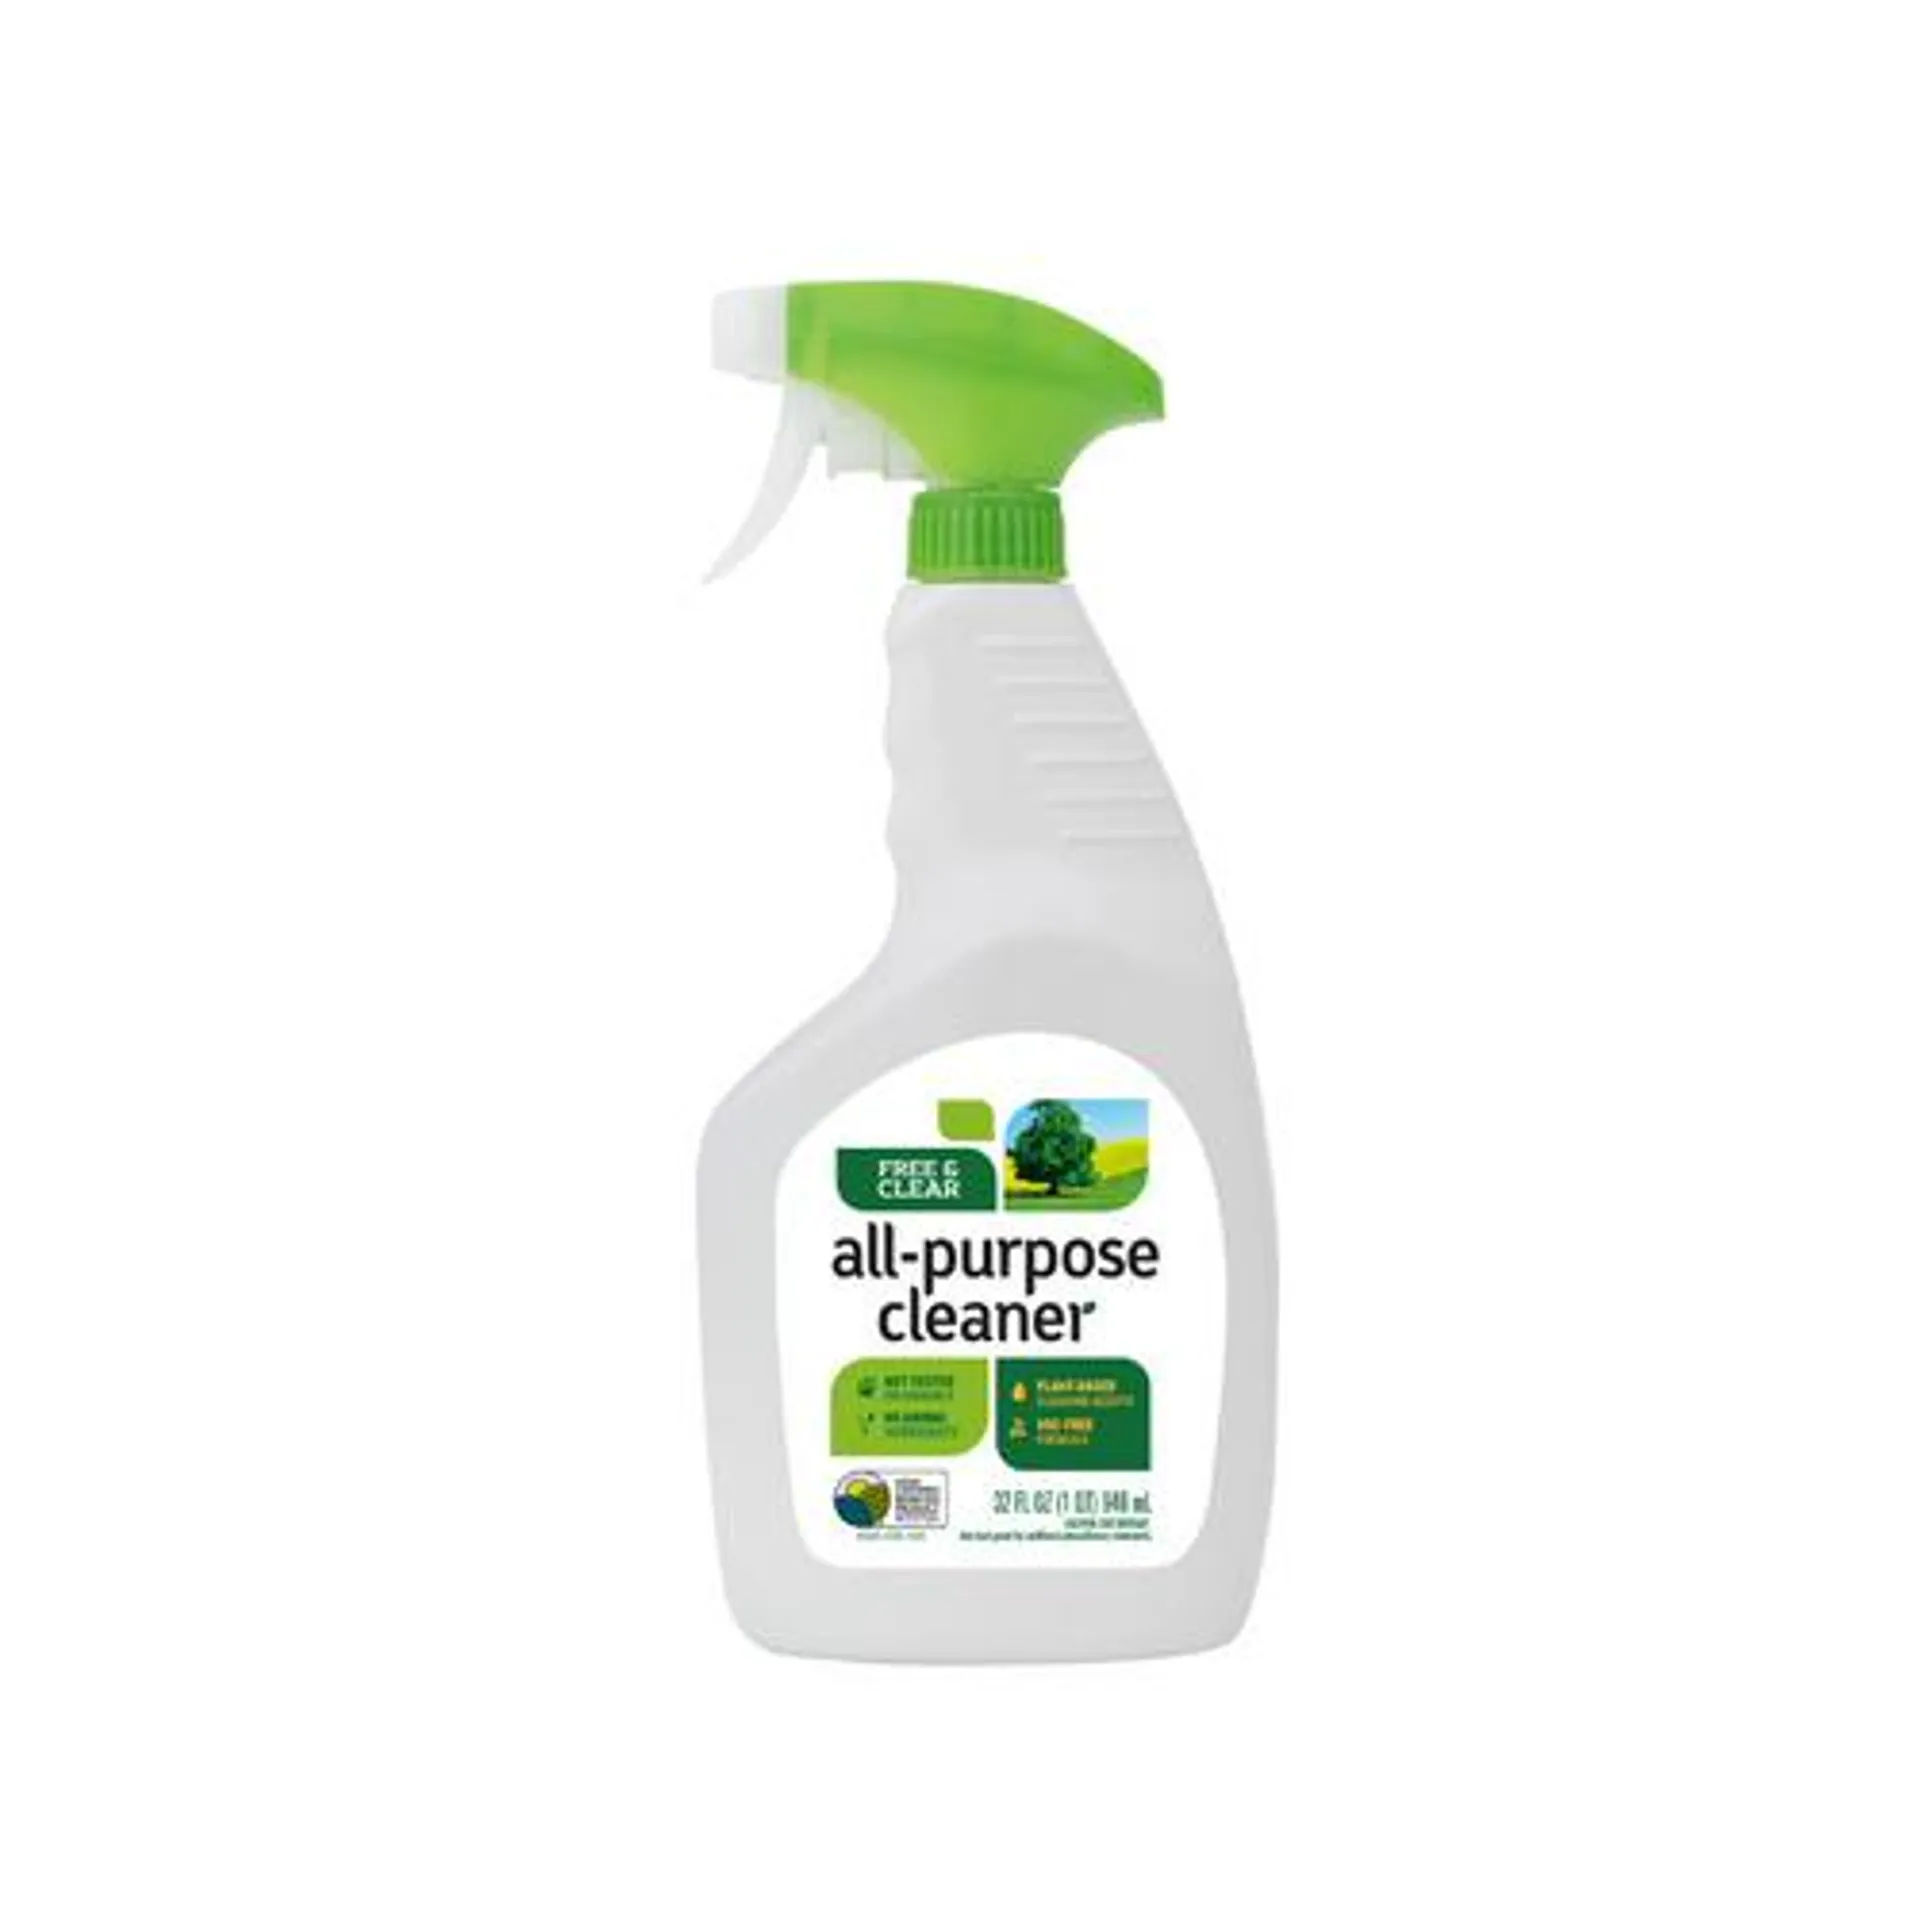 all-purpose spray cleaner, free & clear